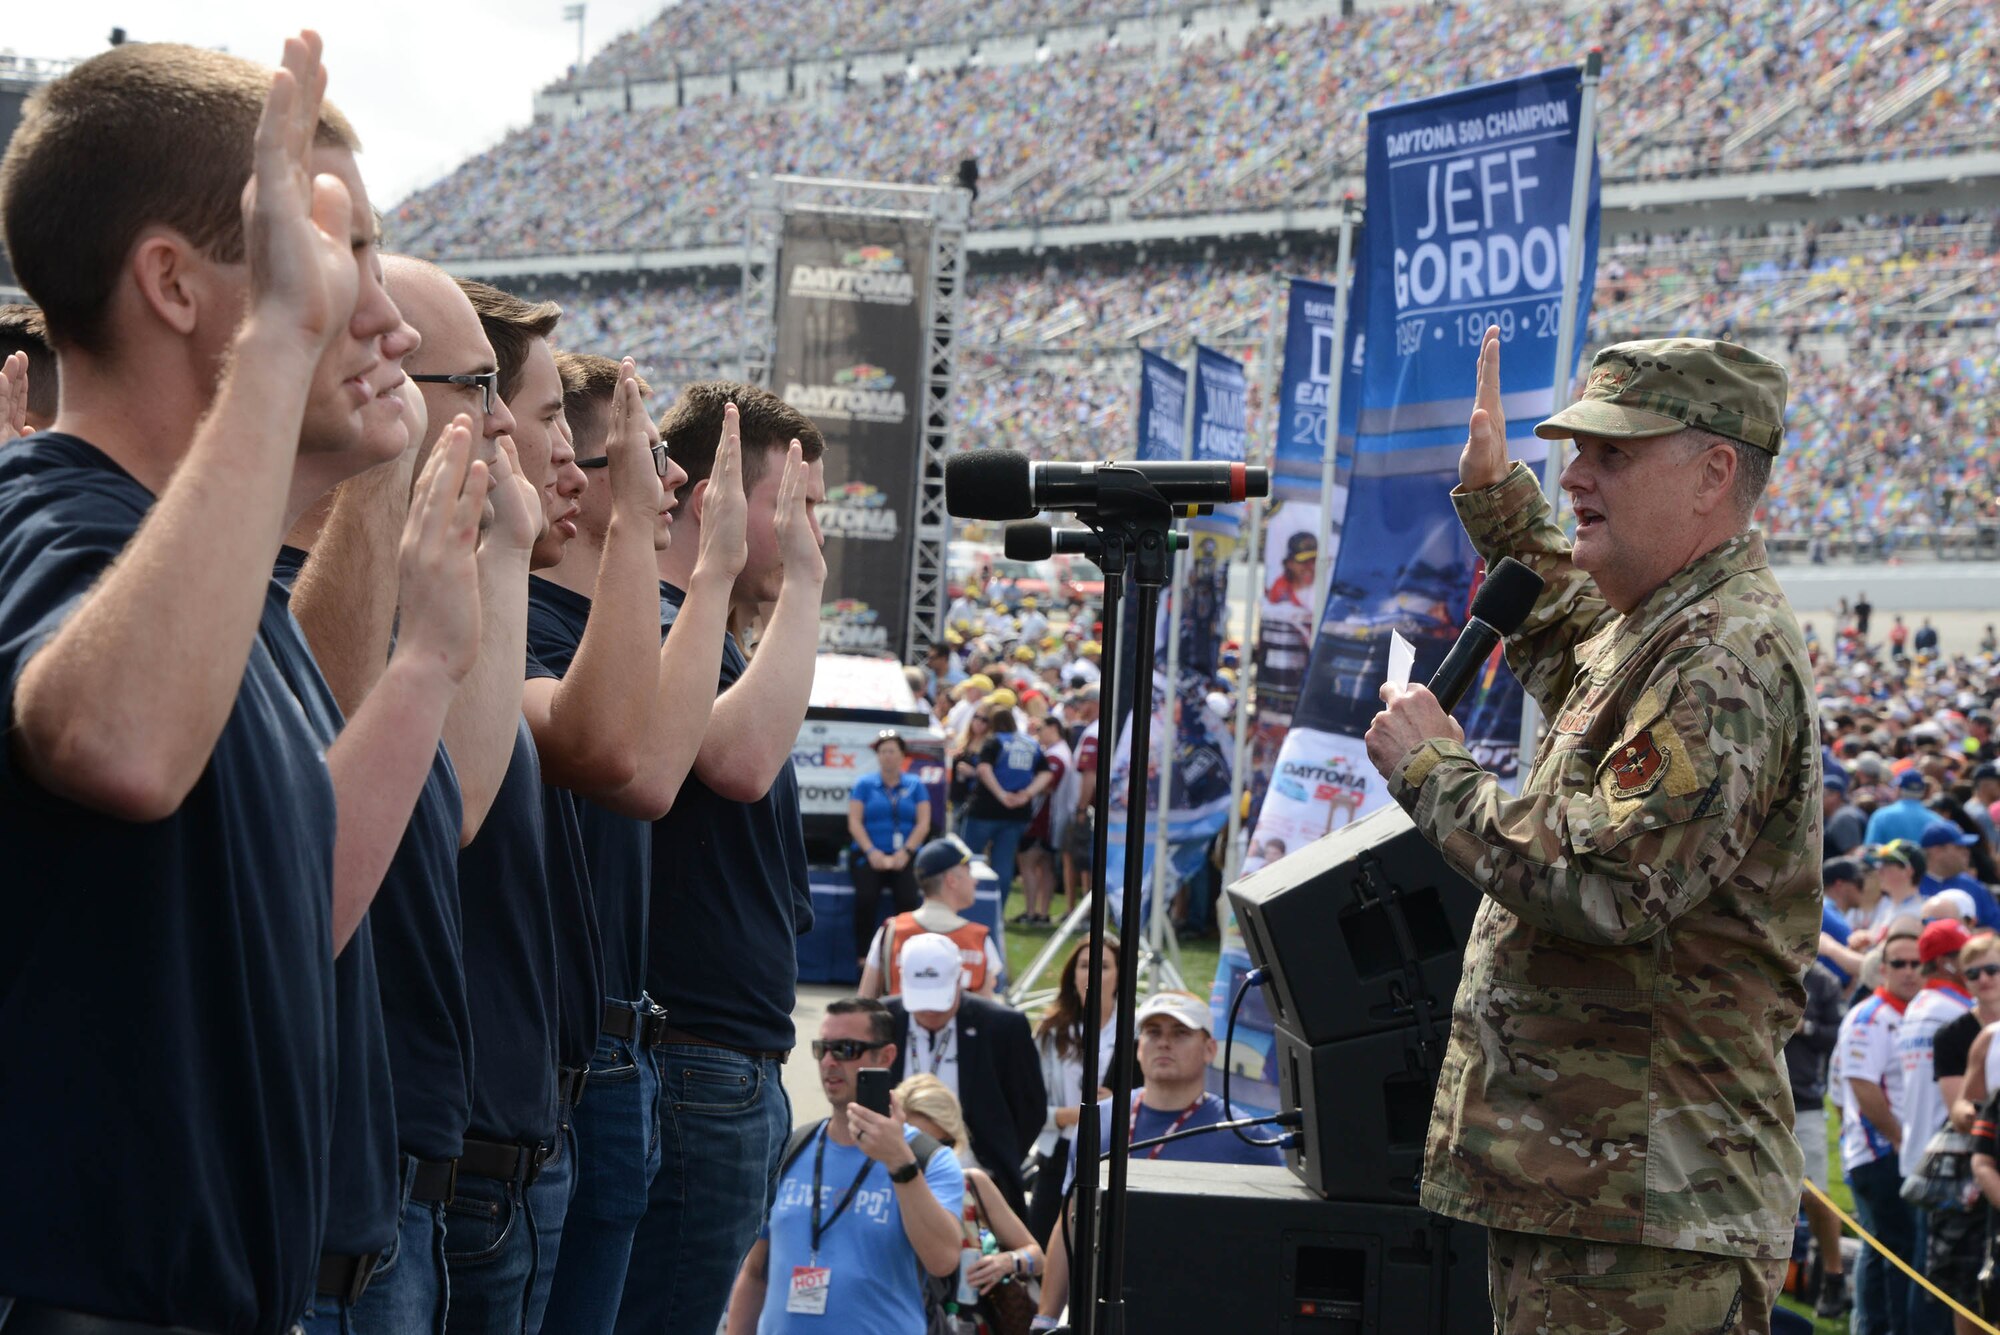 Lt. Gen. Brad Webb, Air Education and Training commander, conducts a Total Force mass oath of enlistment to 30 new members of the Air Force at the Daytona 500.